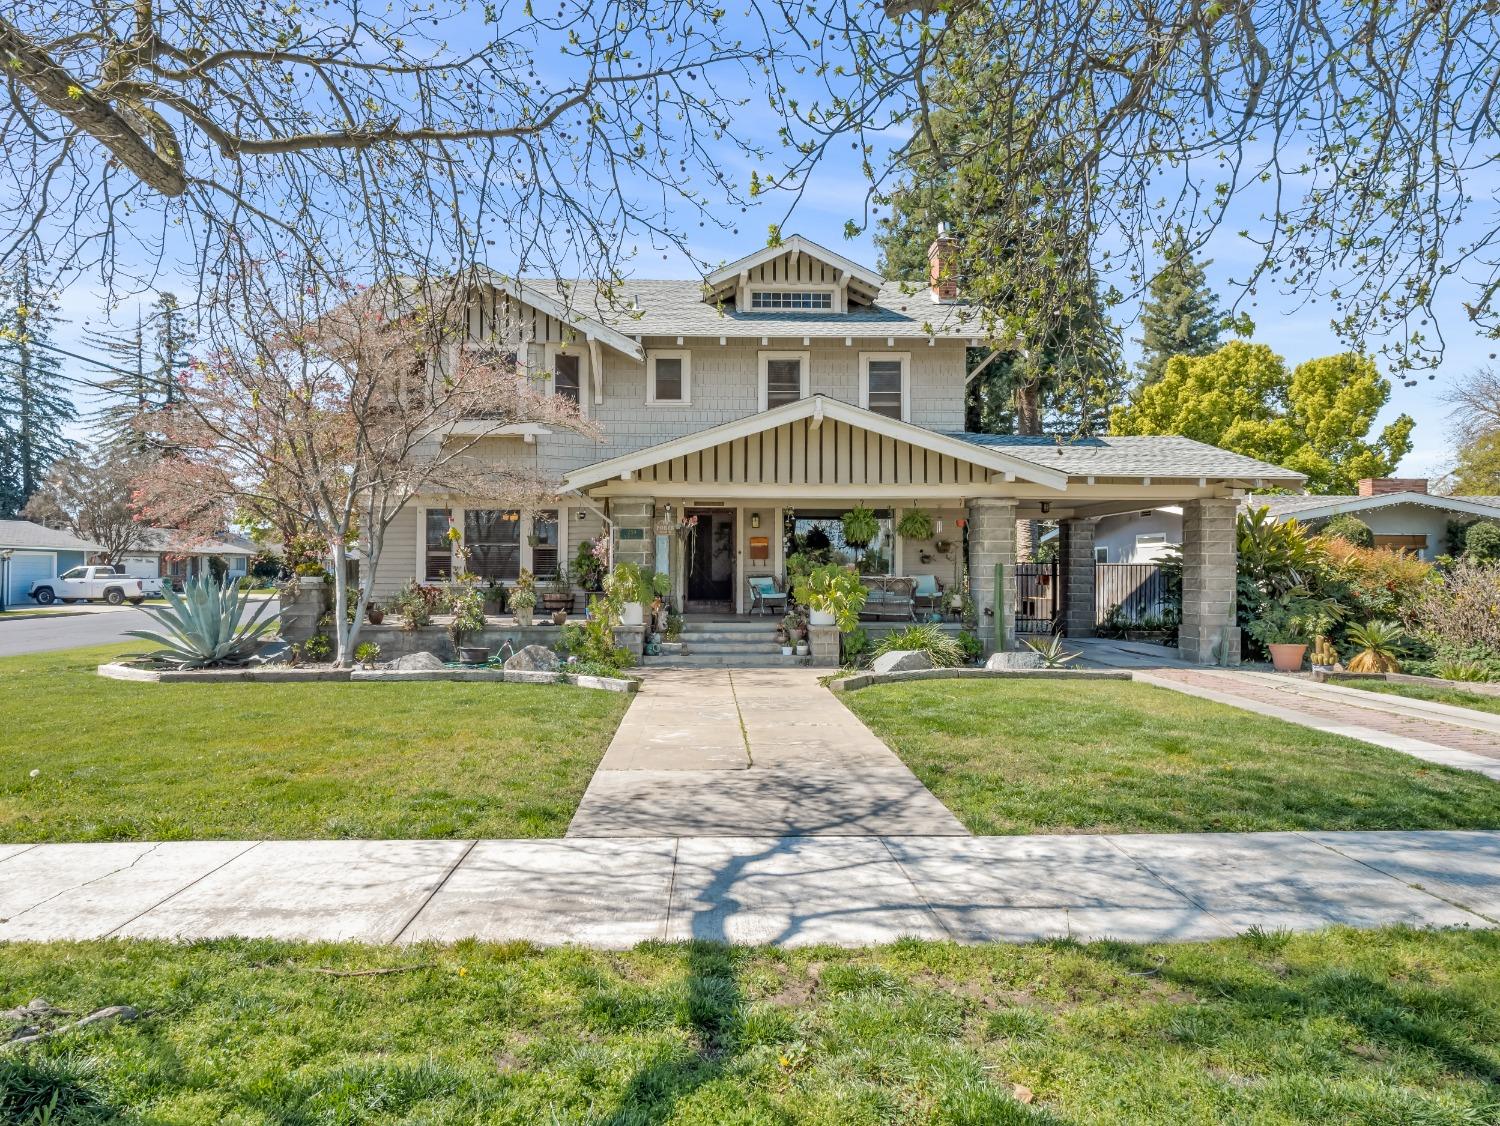 Photo of 259 S Reed Ave in Reedley, CA